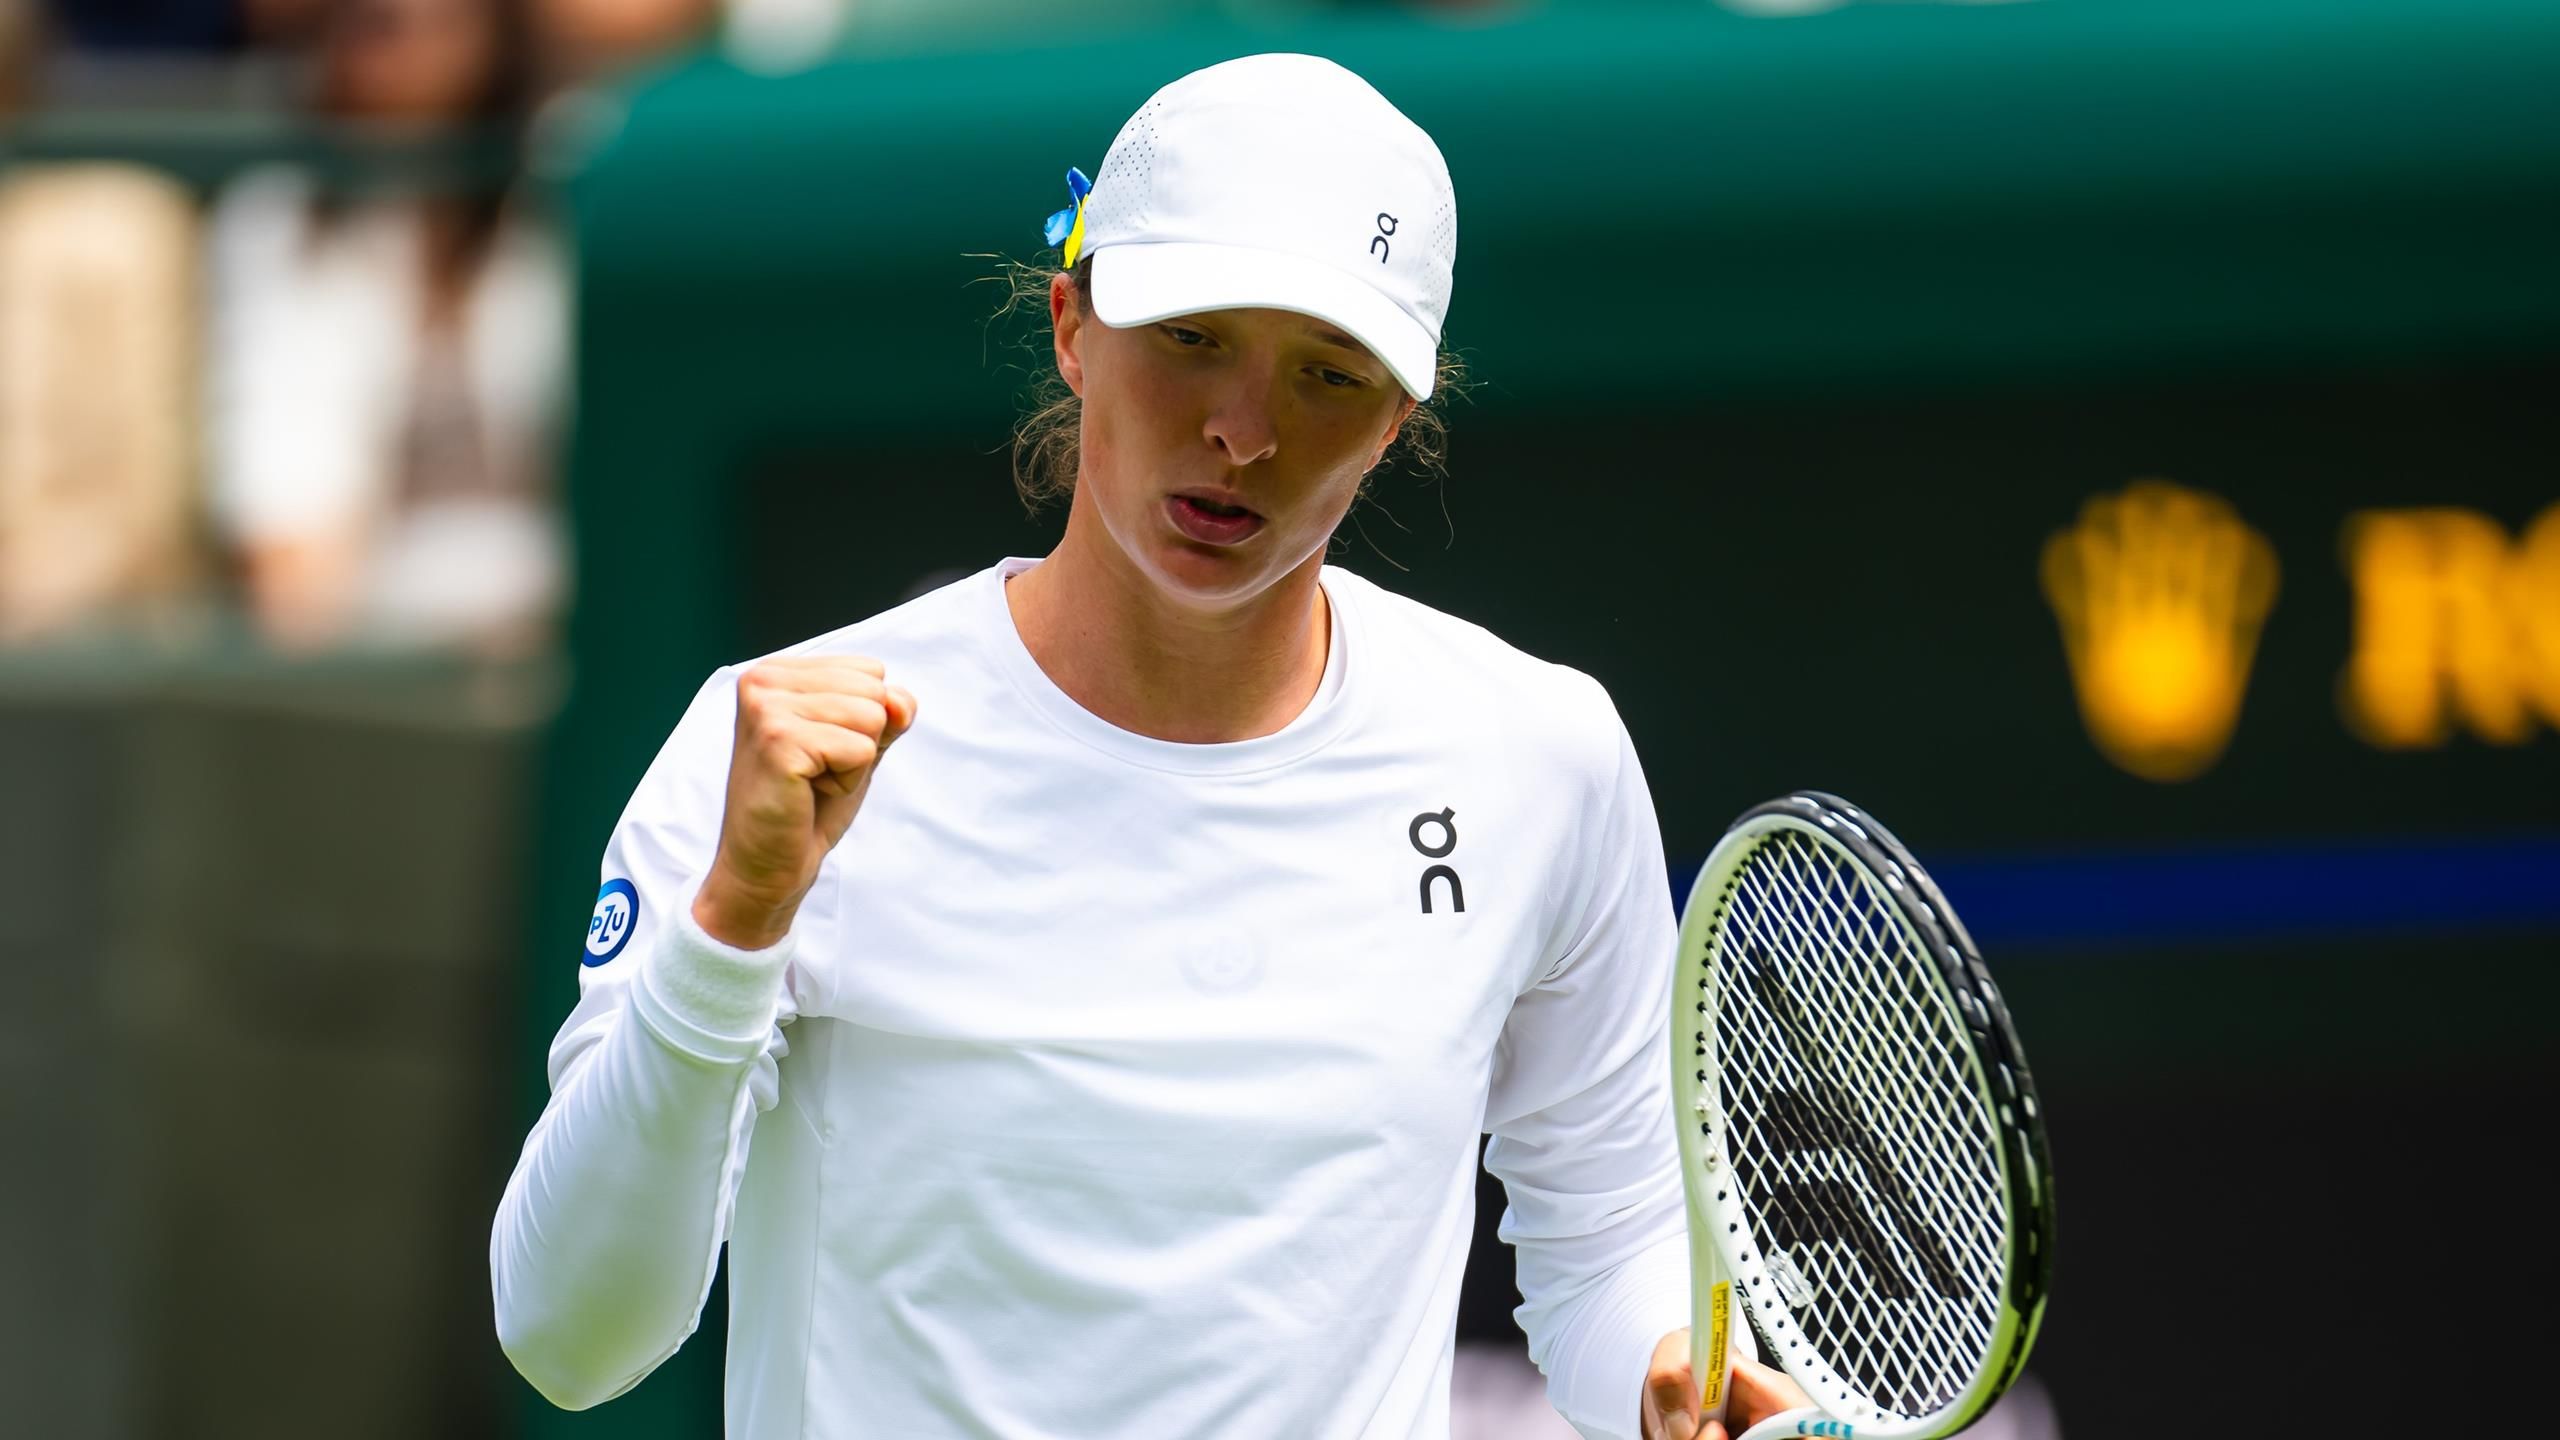 Iga Swiatek makes positive start to Wimbledon with first-round win over Zhu Lin, Jessica Pegula survives scare